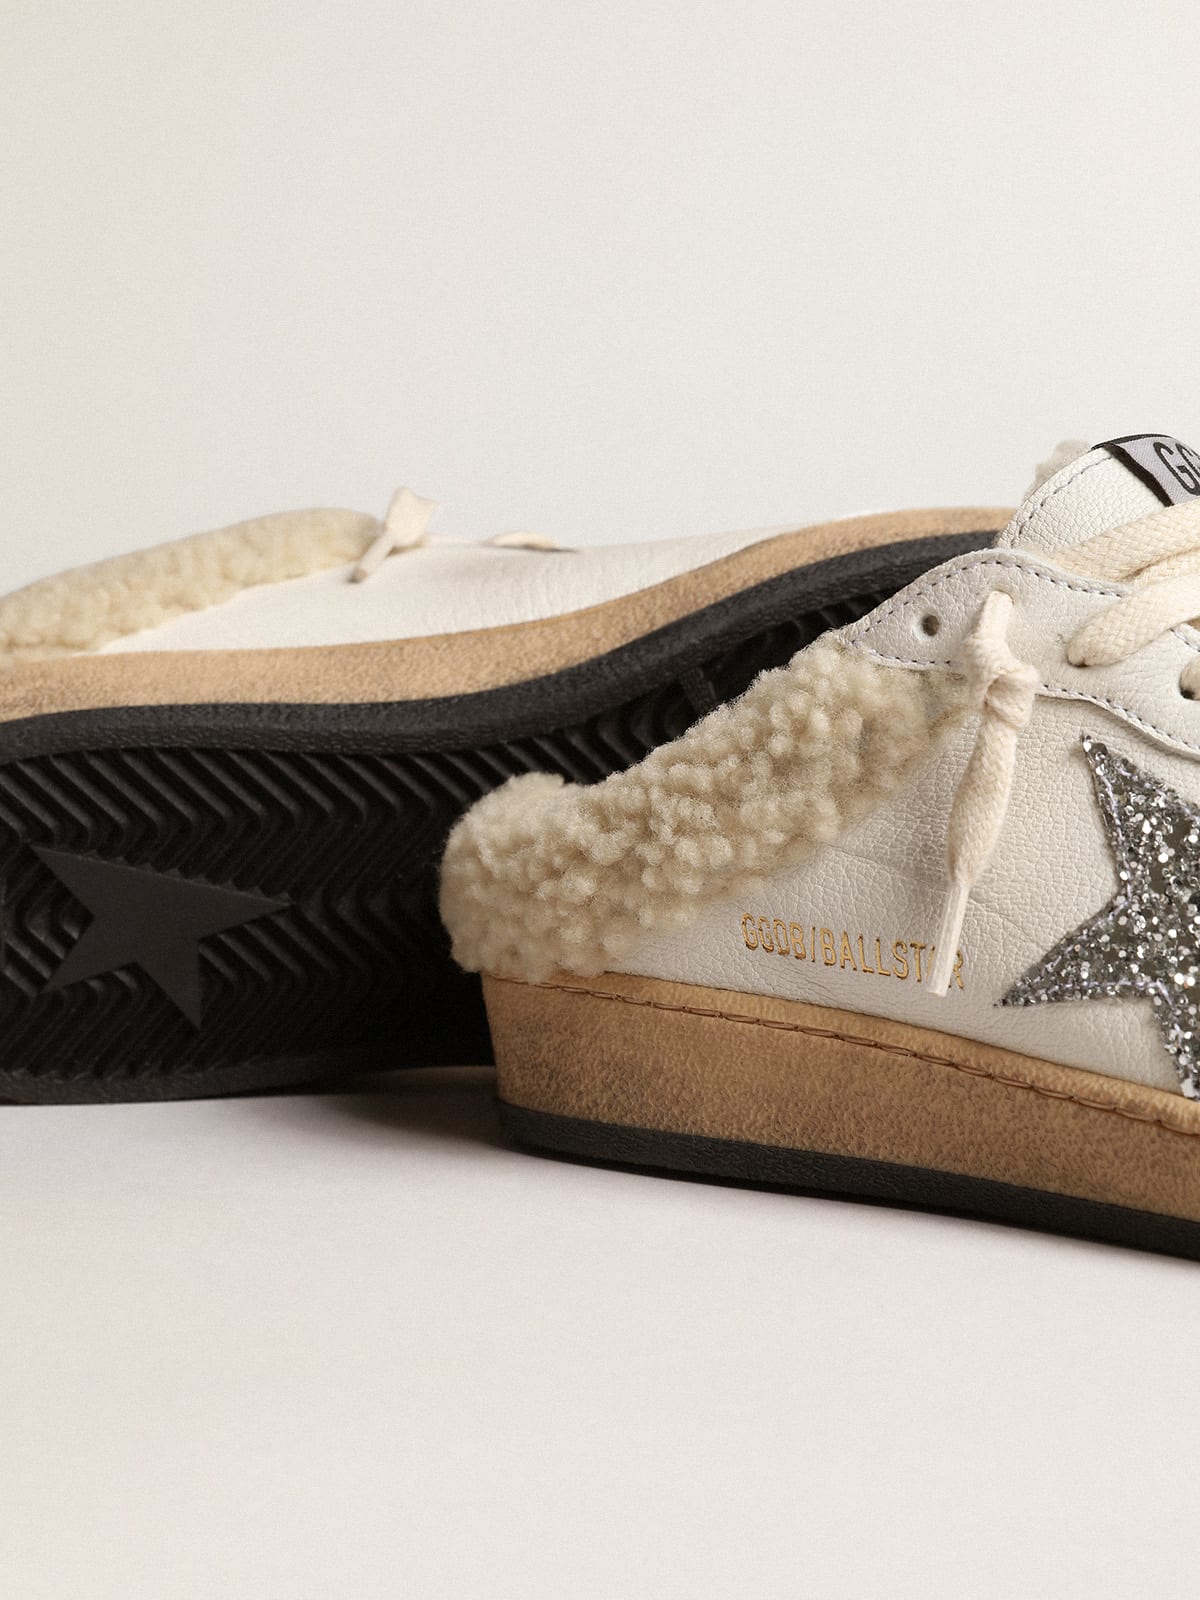 Golden Goose - Ball Star Sabots with glitter star and shearling lining in 